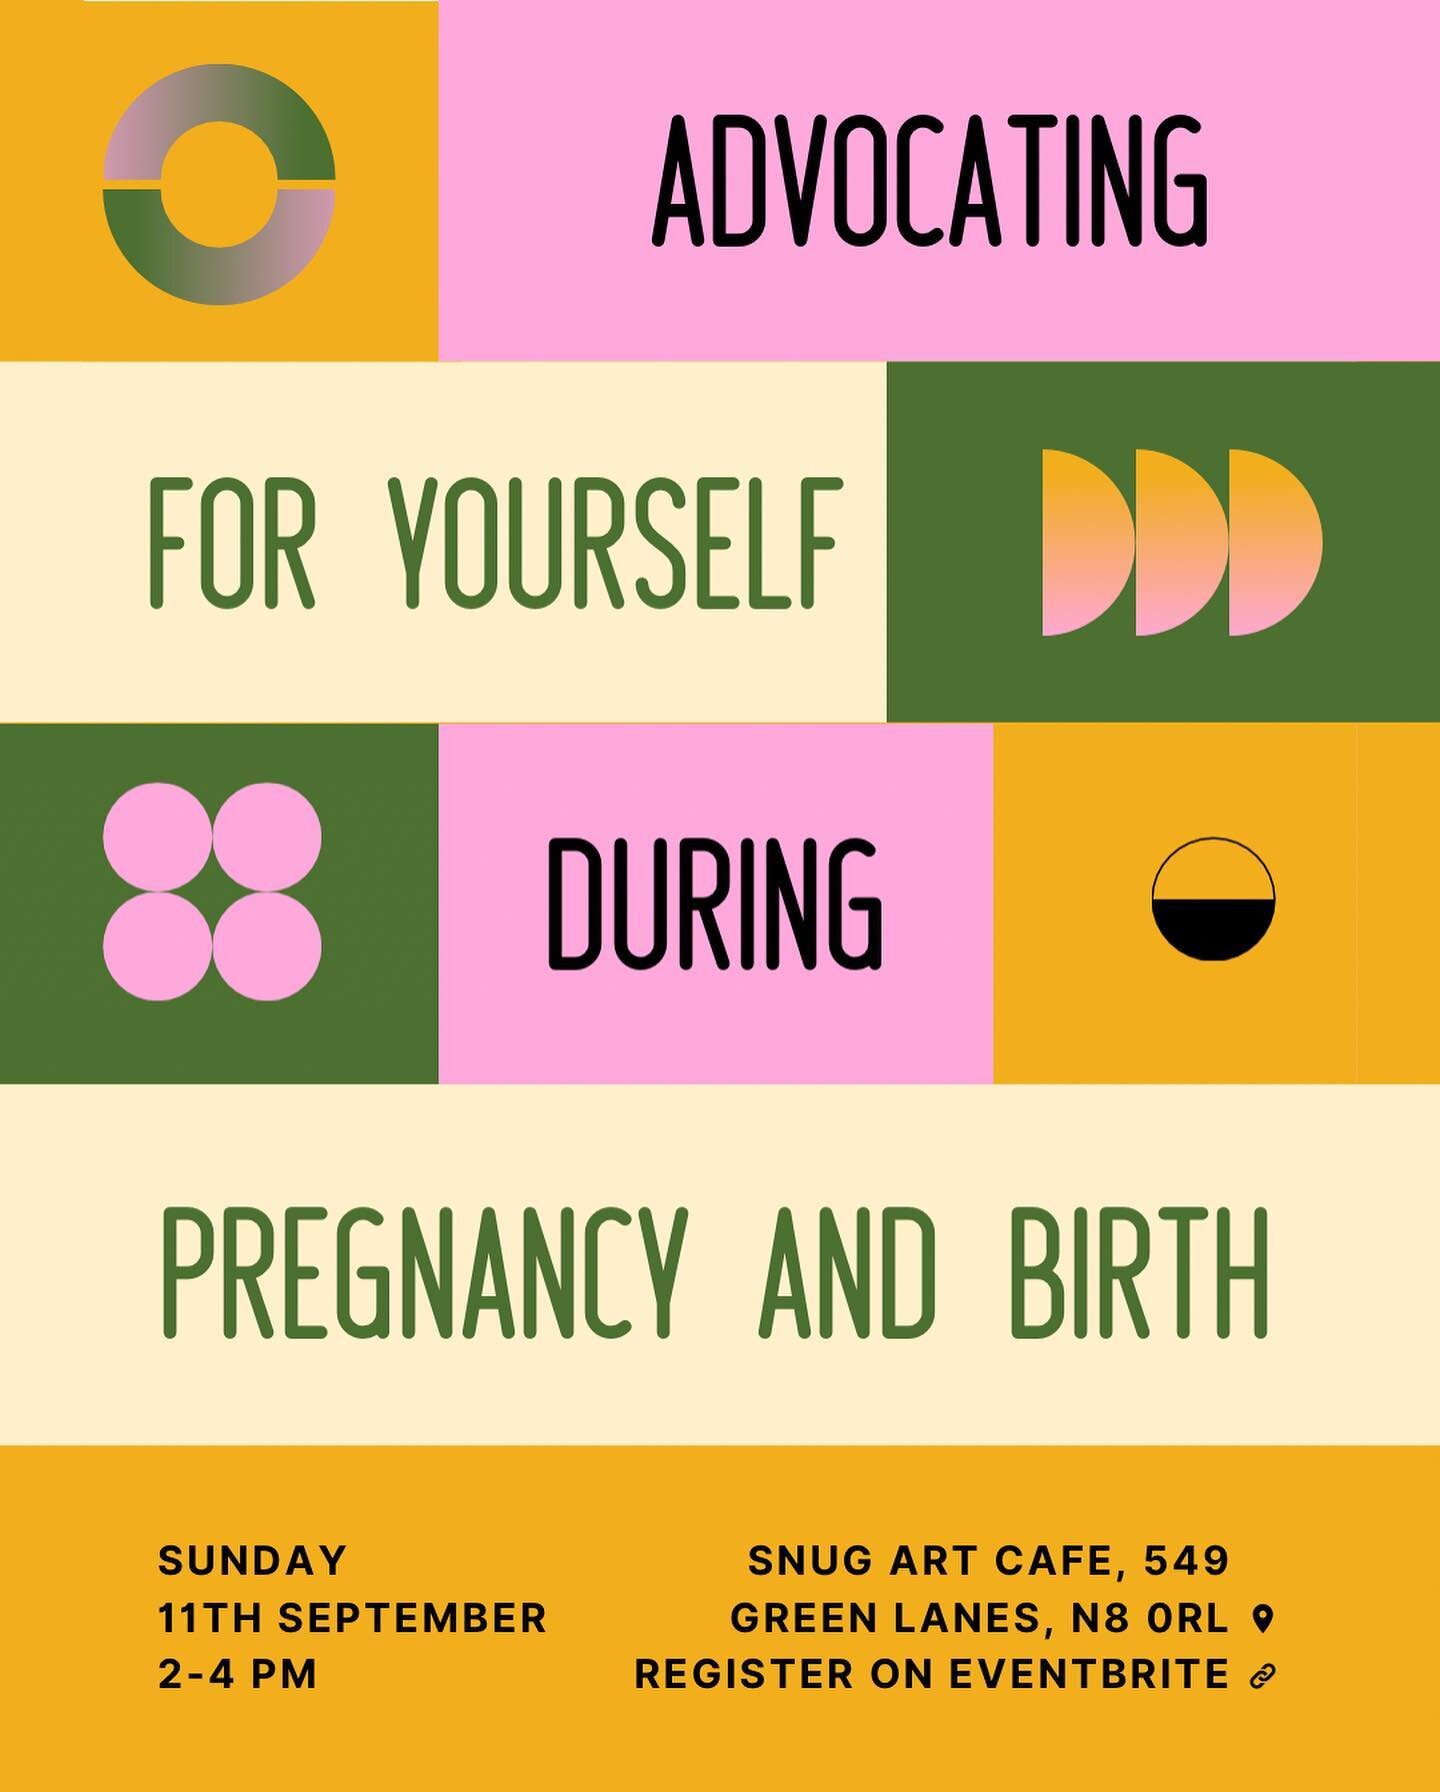 NORTH LONDON FOLKS!

I am so excited to announce a new perinatal workshop for pregnant people and their families starting this September.

This will be a group workshop in Haringey facilitated by myself where we&rsquo;ll cover:

🌻 self-advocacy tech